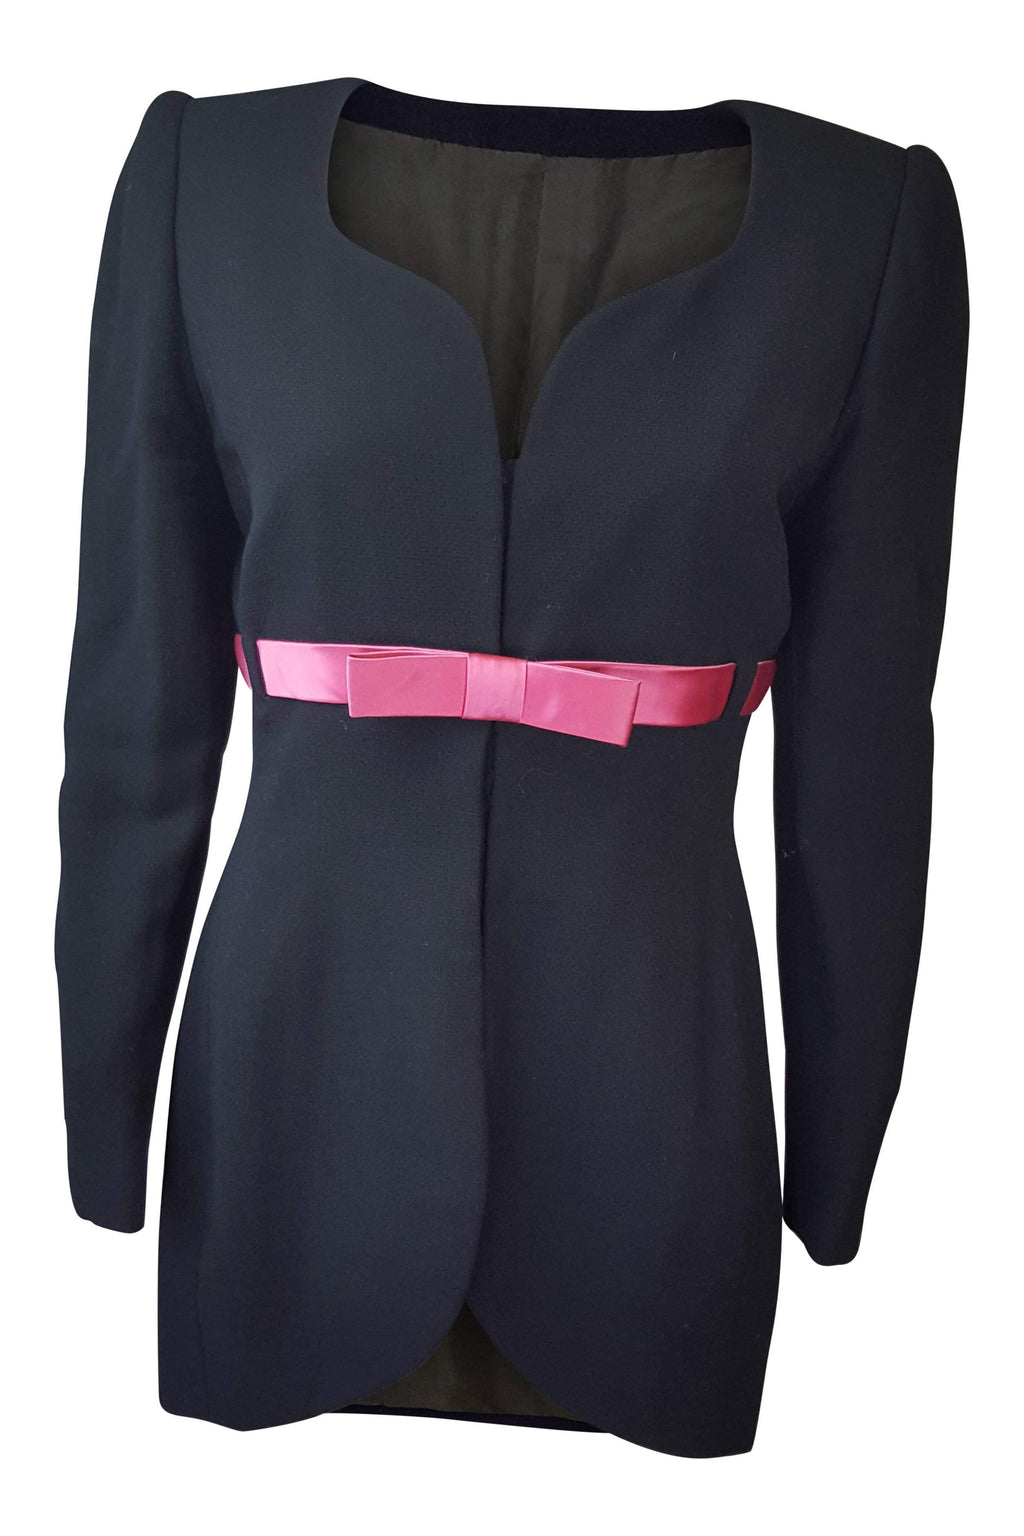 MIRELLA CAVORSO Black and Pink Fitted Collarless Jacket-Mirella Cavorso-The Freperie